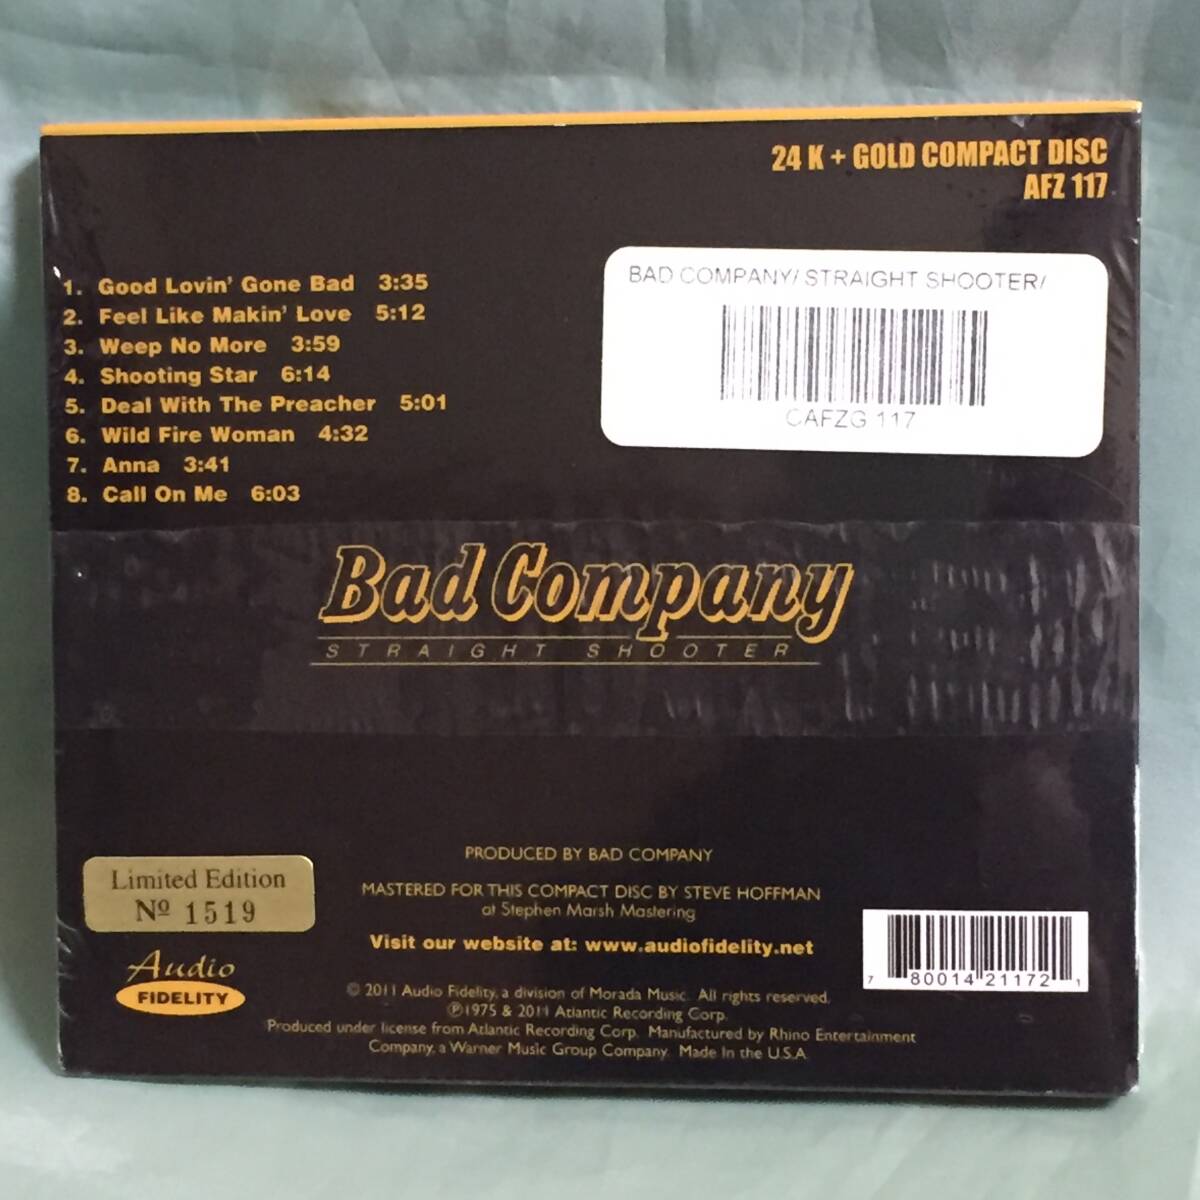 Bad Company / Straight Shooter 24 KT + Gold limited, numbered edition compact disc 未開封_画像2